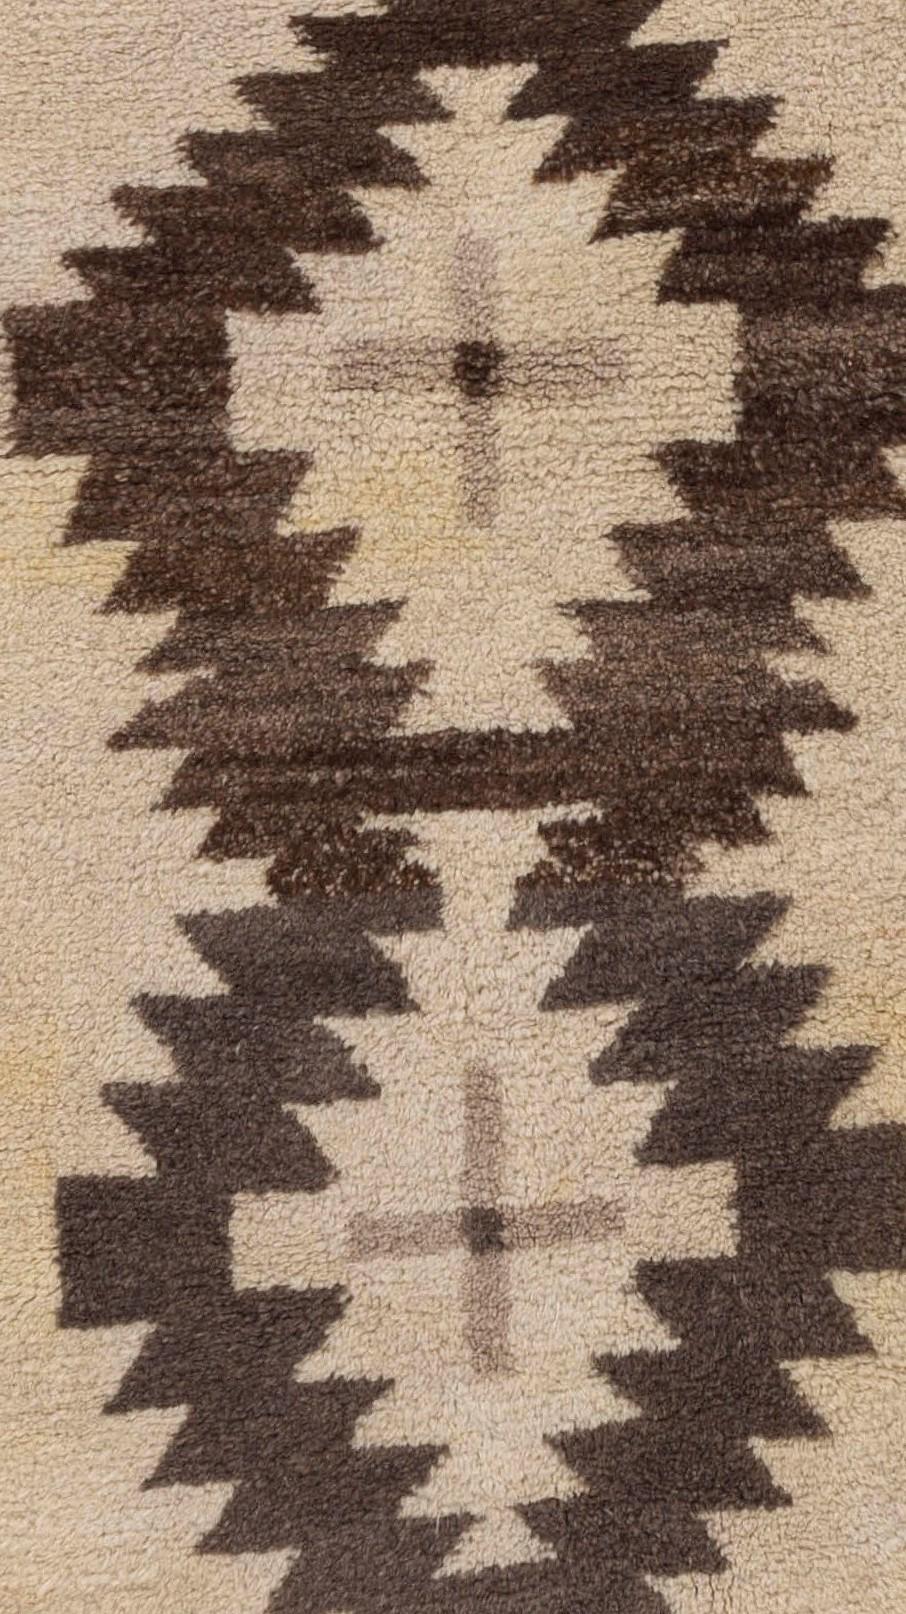 Hand-Knotted 2.7x7.3 ft Vintage Tulu Runner Rug. 100% Natural Wool. Custom Options Available